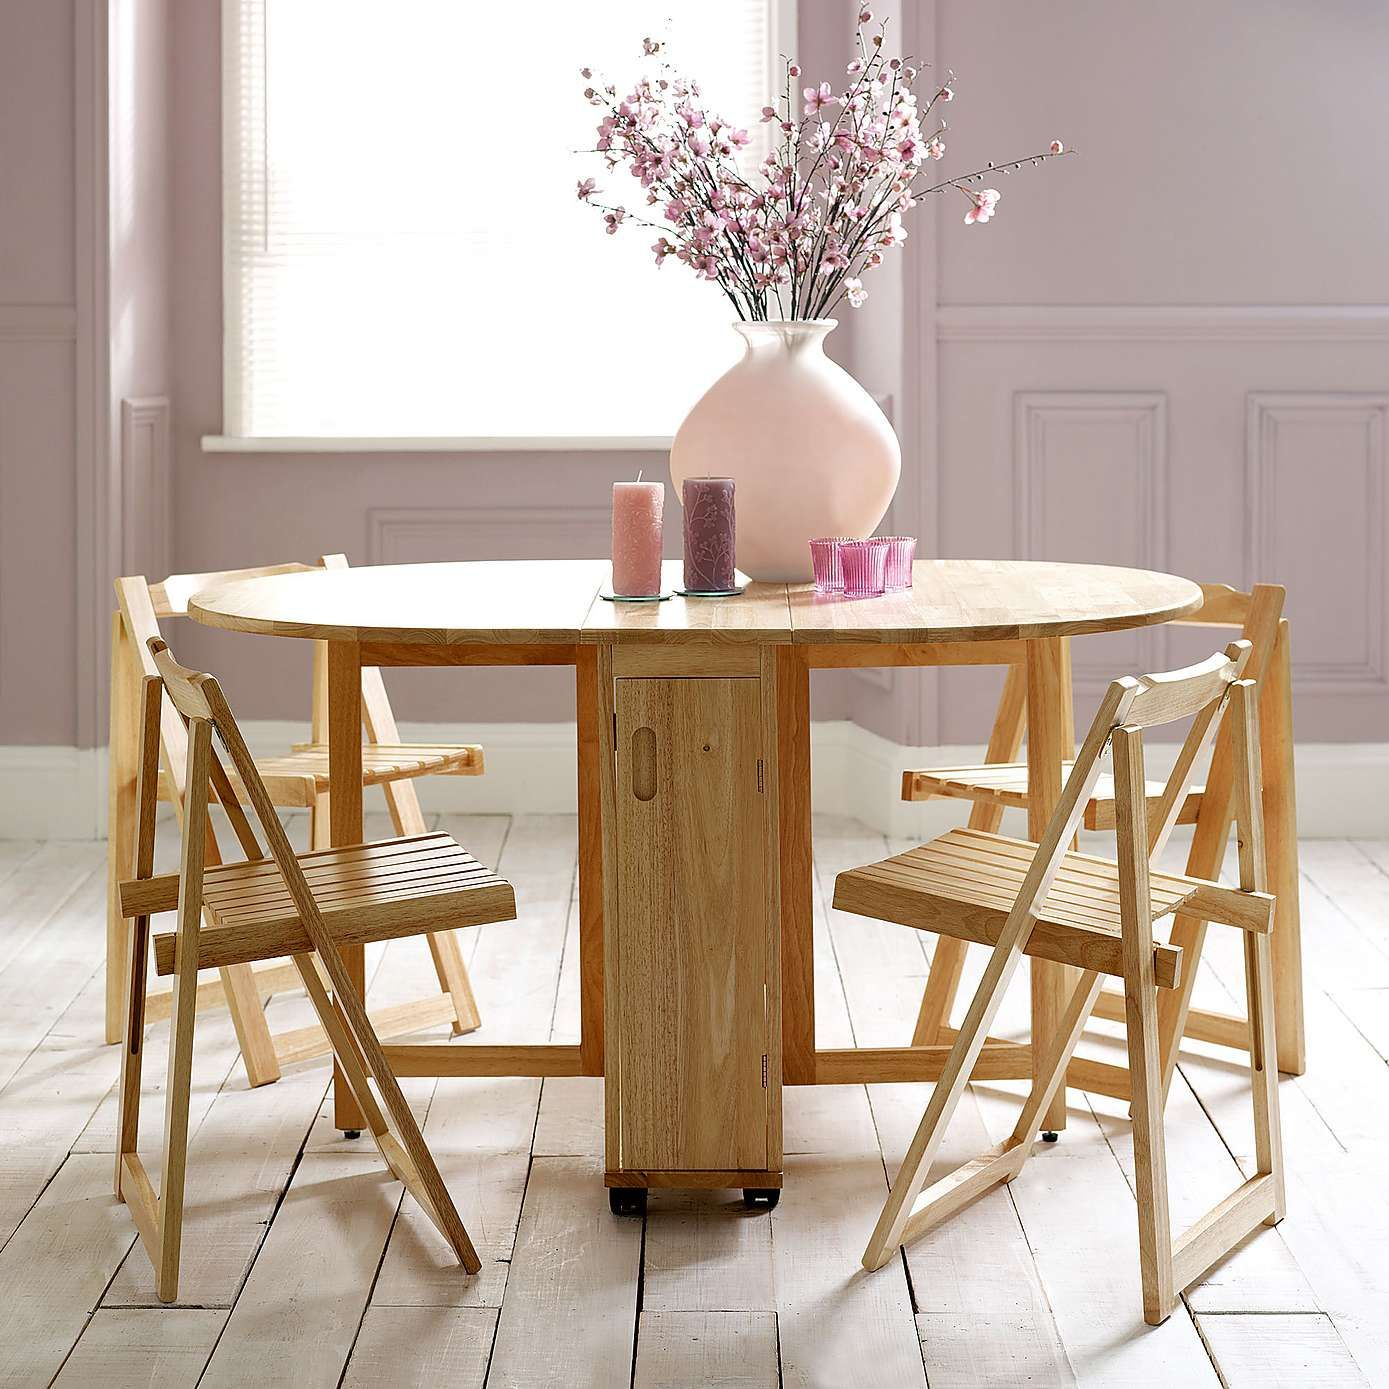 Rubberwood Butterfly Table With 4 Chairs Dunelm Folding throughout dimensions 1389 X 1389